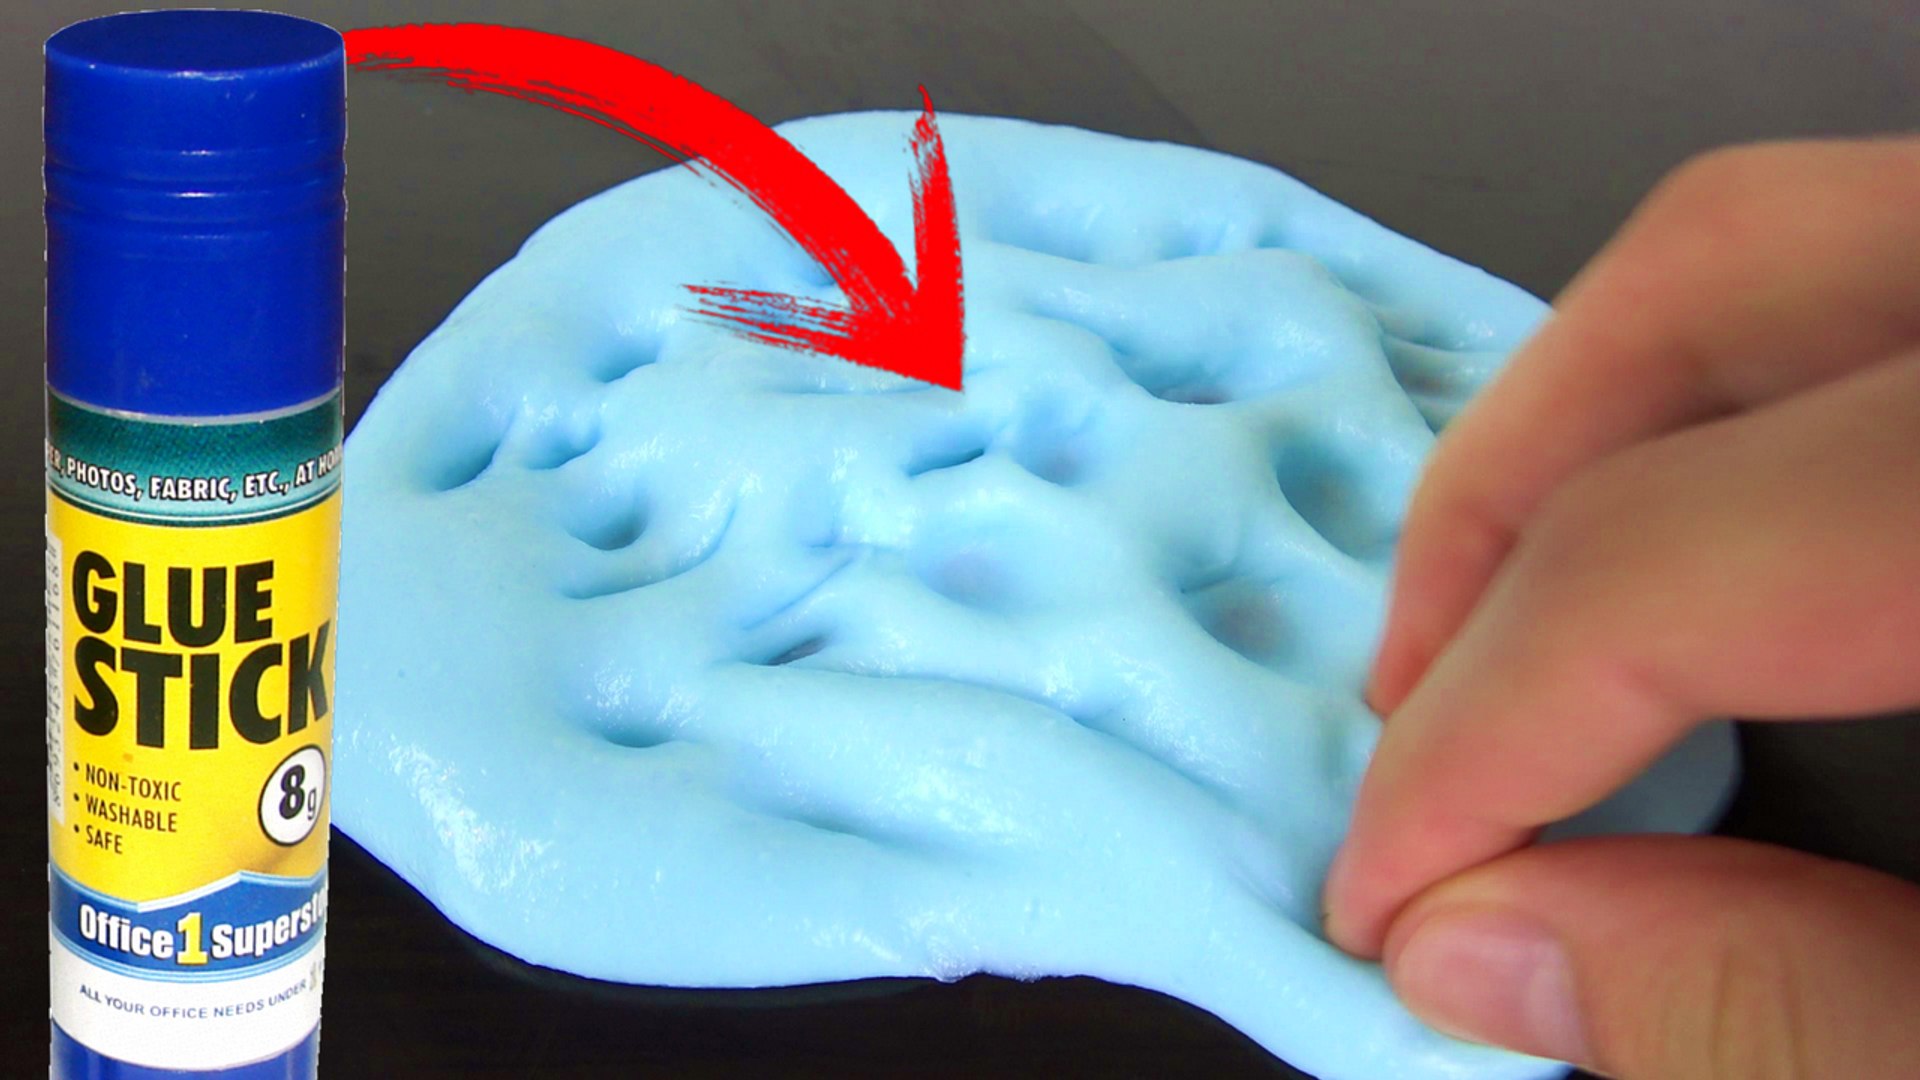 How To Make Best Slime With Glue Stick 3 Diy Glue Stick Slime Easy Recipes видео Dailymotion